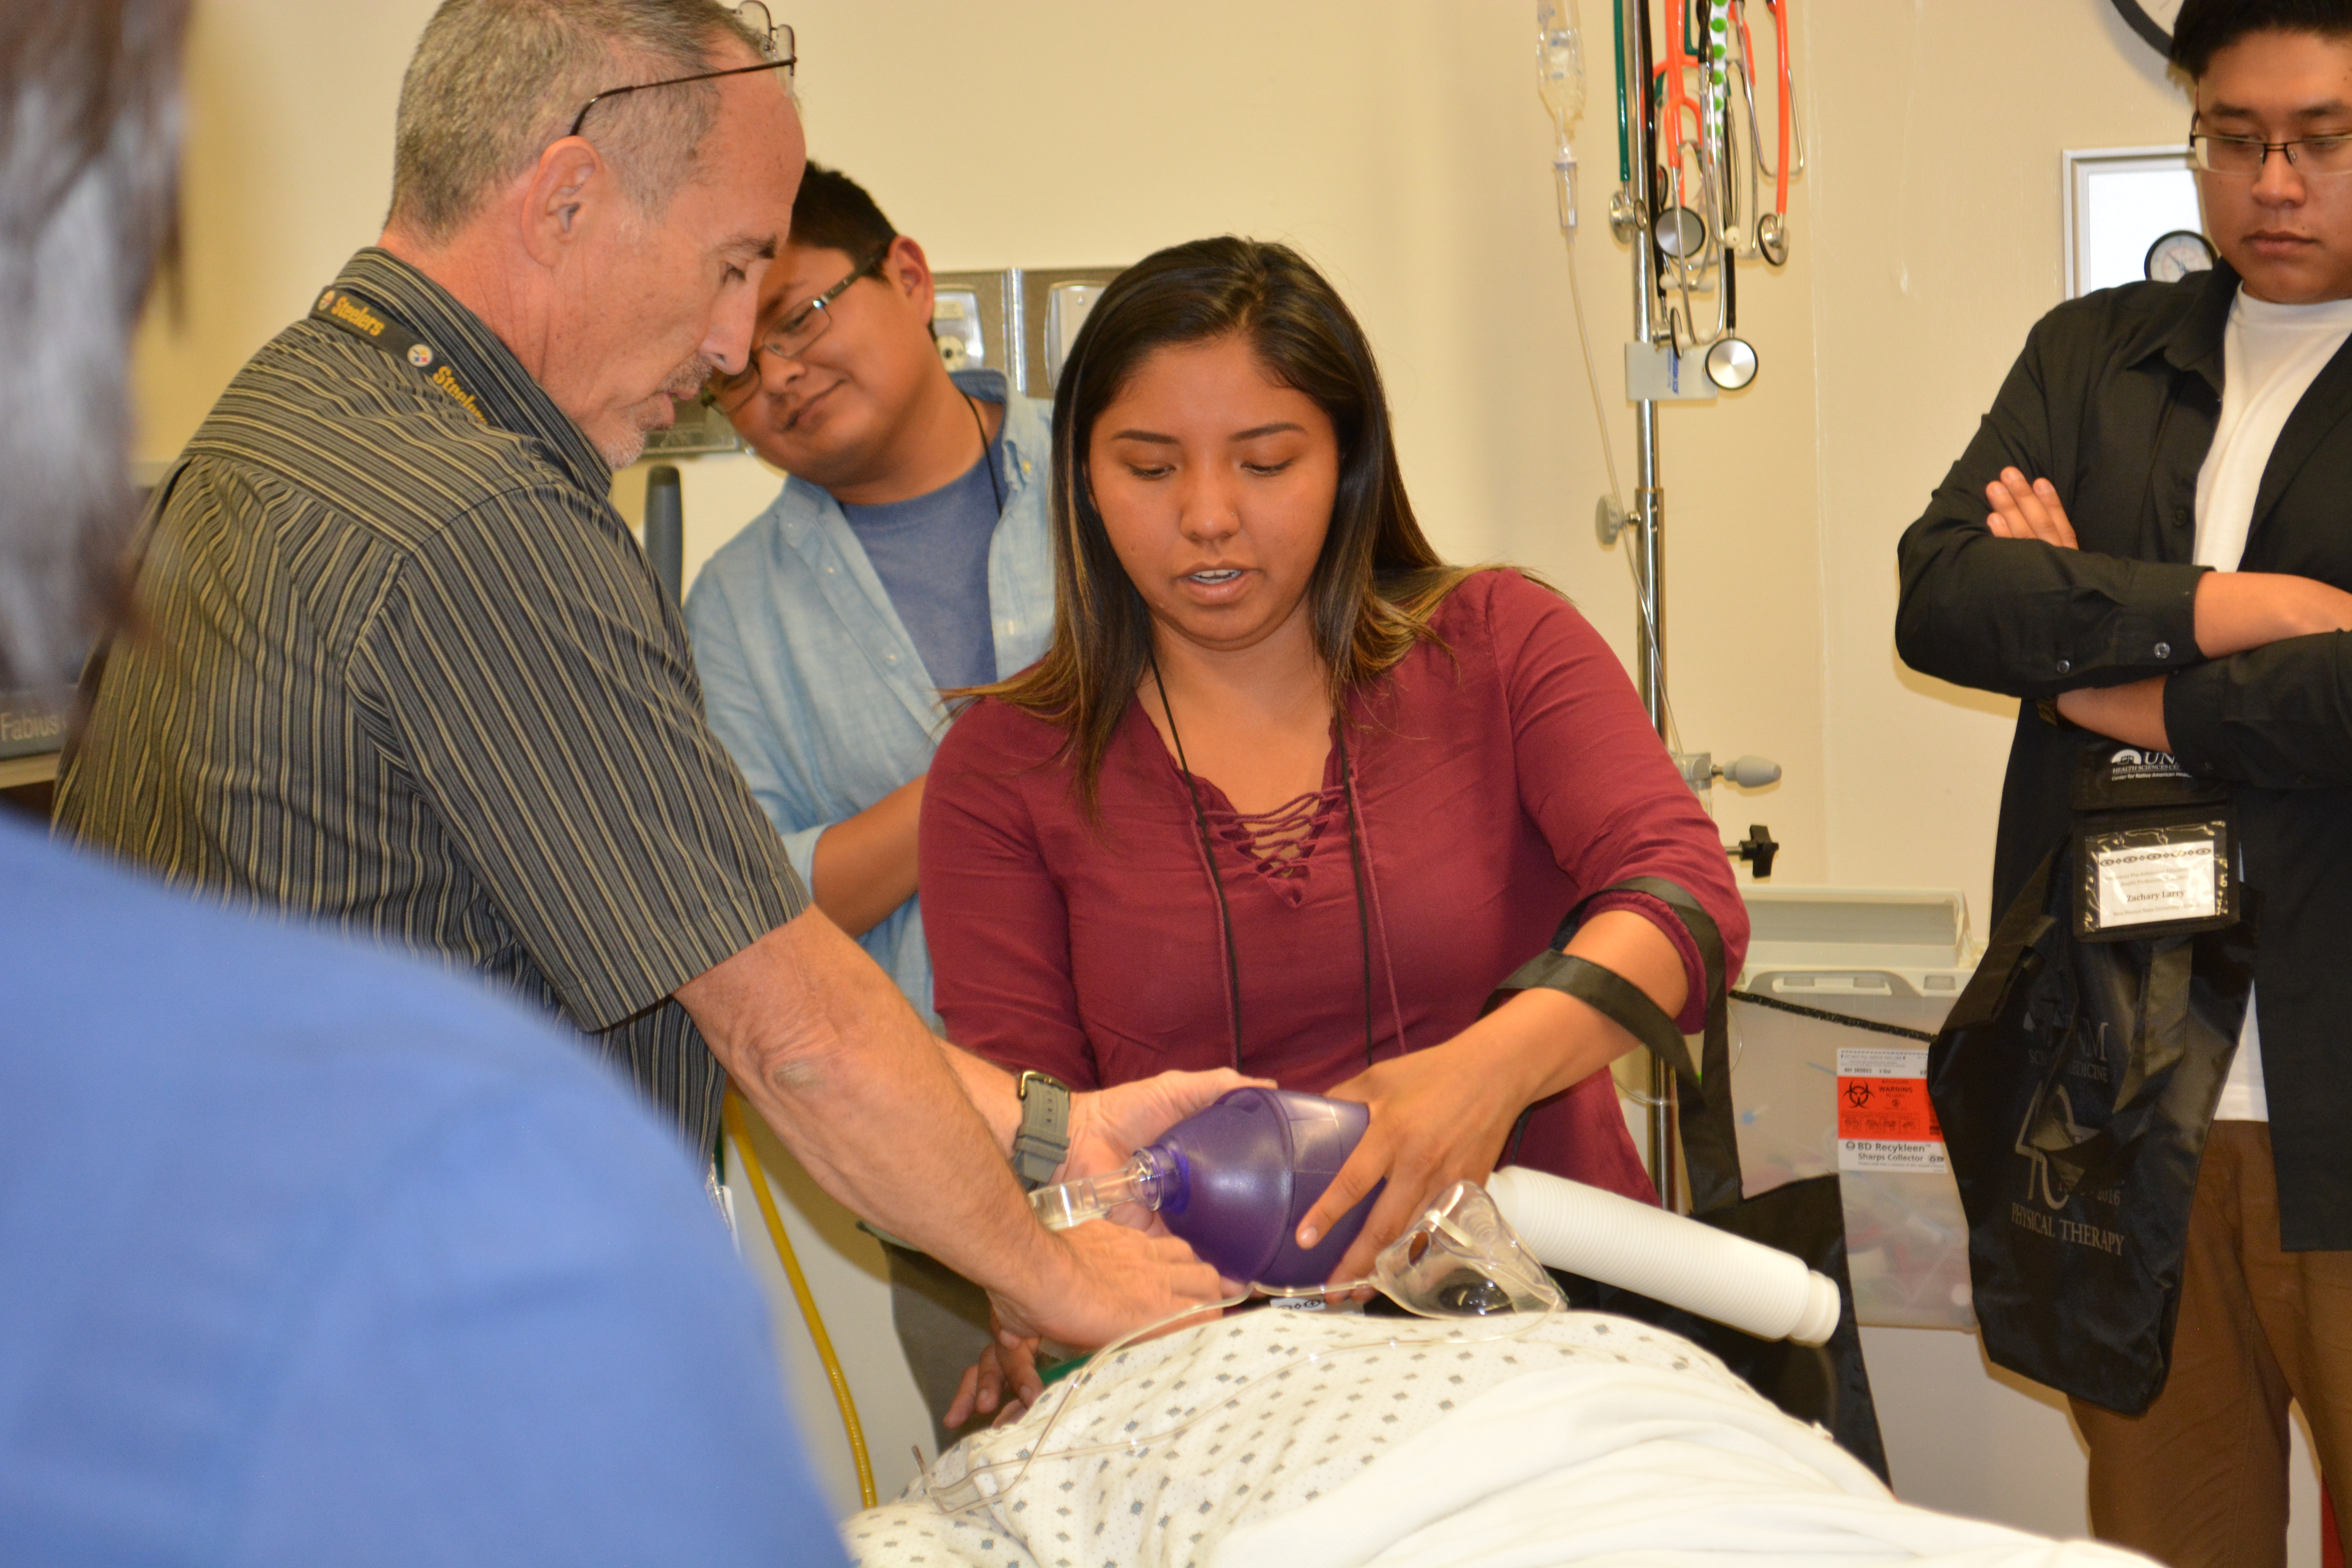 Participant doing hands-on activity - intubating dummy patient.